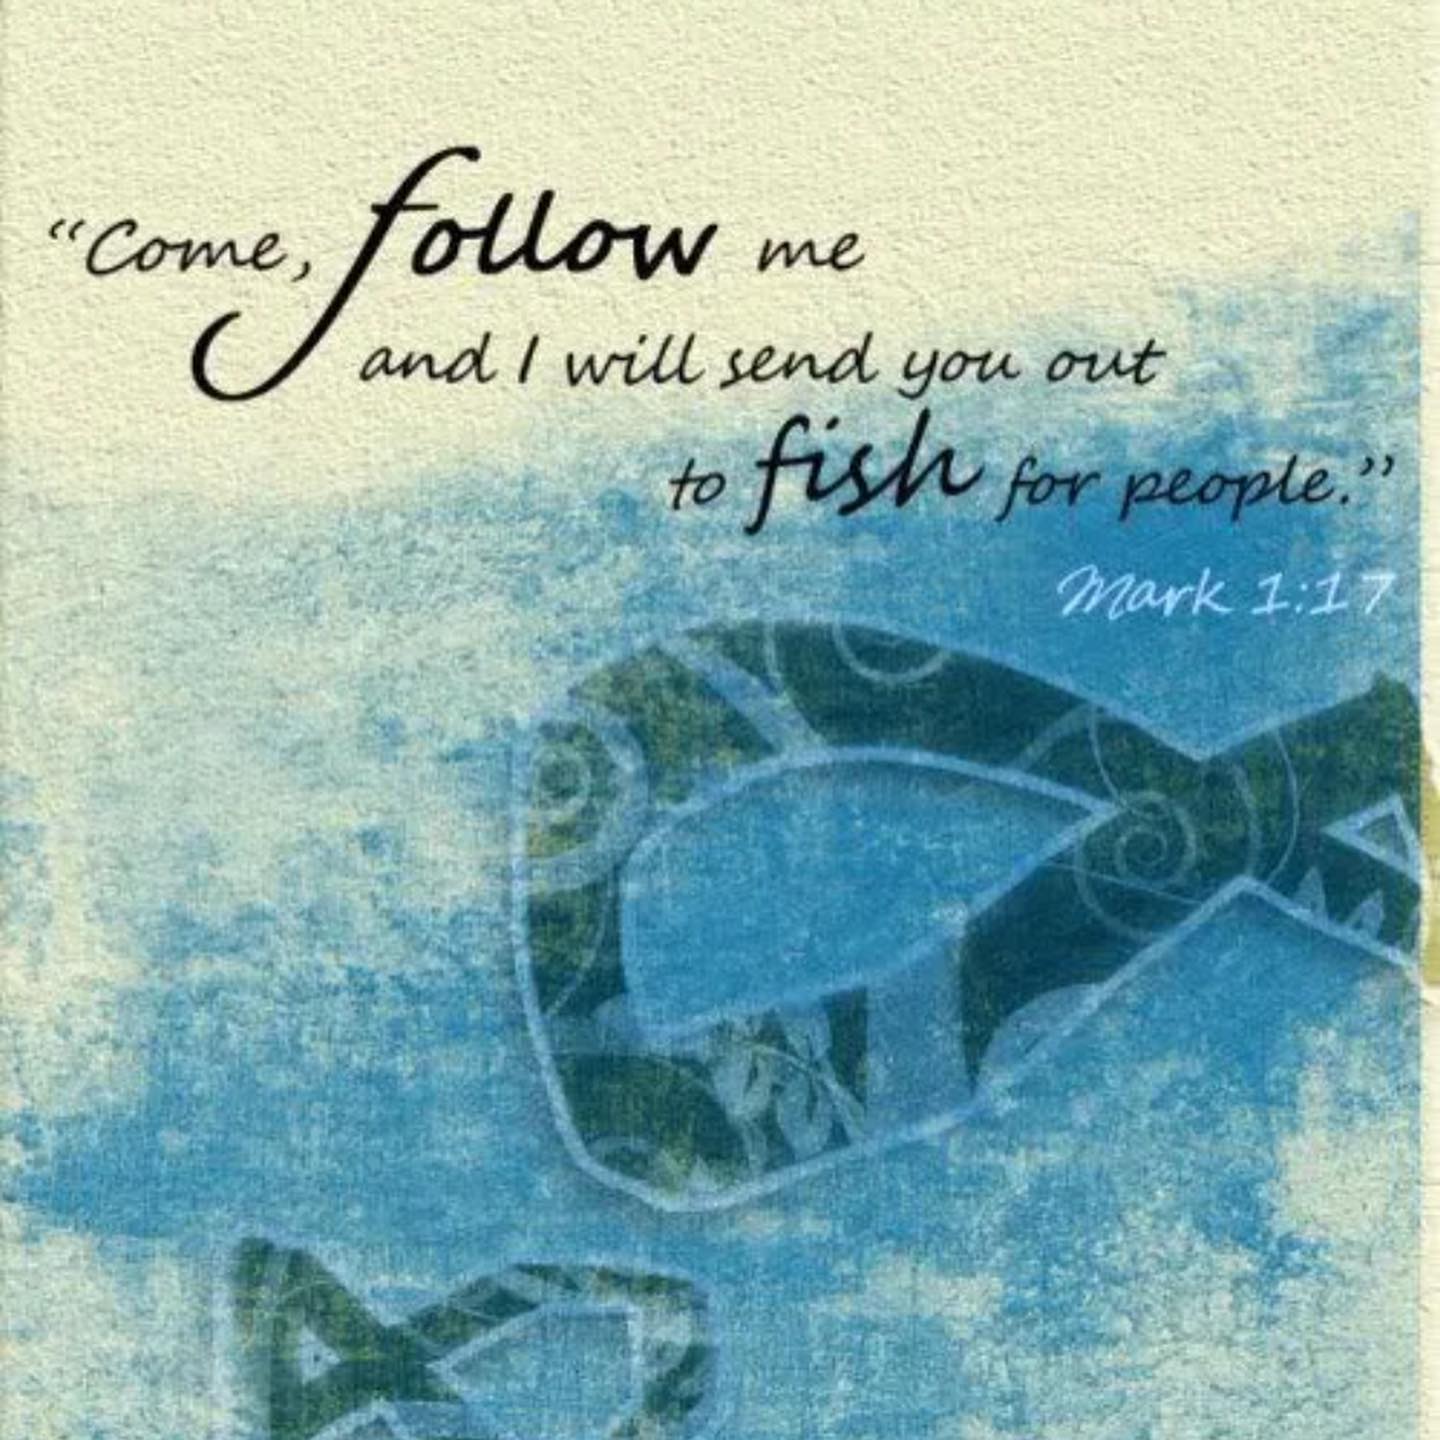 Fishing was a major industry around the Sea of Galilee. Jesus called the disciples to fish for people with the same gusto as they fished for food. The gospel would be like a net, lifting people from darkness into light! Our nation is in trouble. We’re in a dark place and need God’s light and truth to bring us up & out. Join us Sunday 10AM @fallbrookvineyardchurch as our friend, @douglasvgibbs aka “Mr. Constitution” returns and shares with us from Mark ch 1. #fishersofmen#trustgod#biblehistory#absolutetruth#constitution#electionweek#salvation#growinginfaith#faithinaction#holiness#aliveinchrist#revival#repentance#wordofgod#worship#prayer #praise#praisethelord#community #support #love#familyofgod #outdoorchurch #organicchurch #outlawchurch #dogfriendlychurch